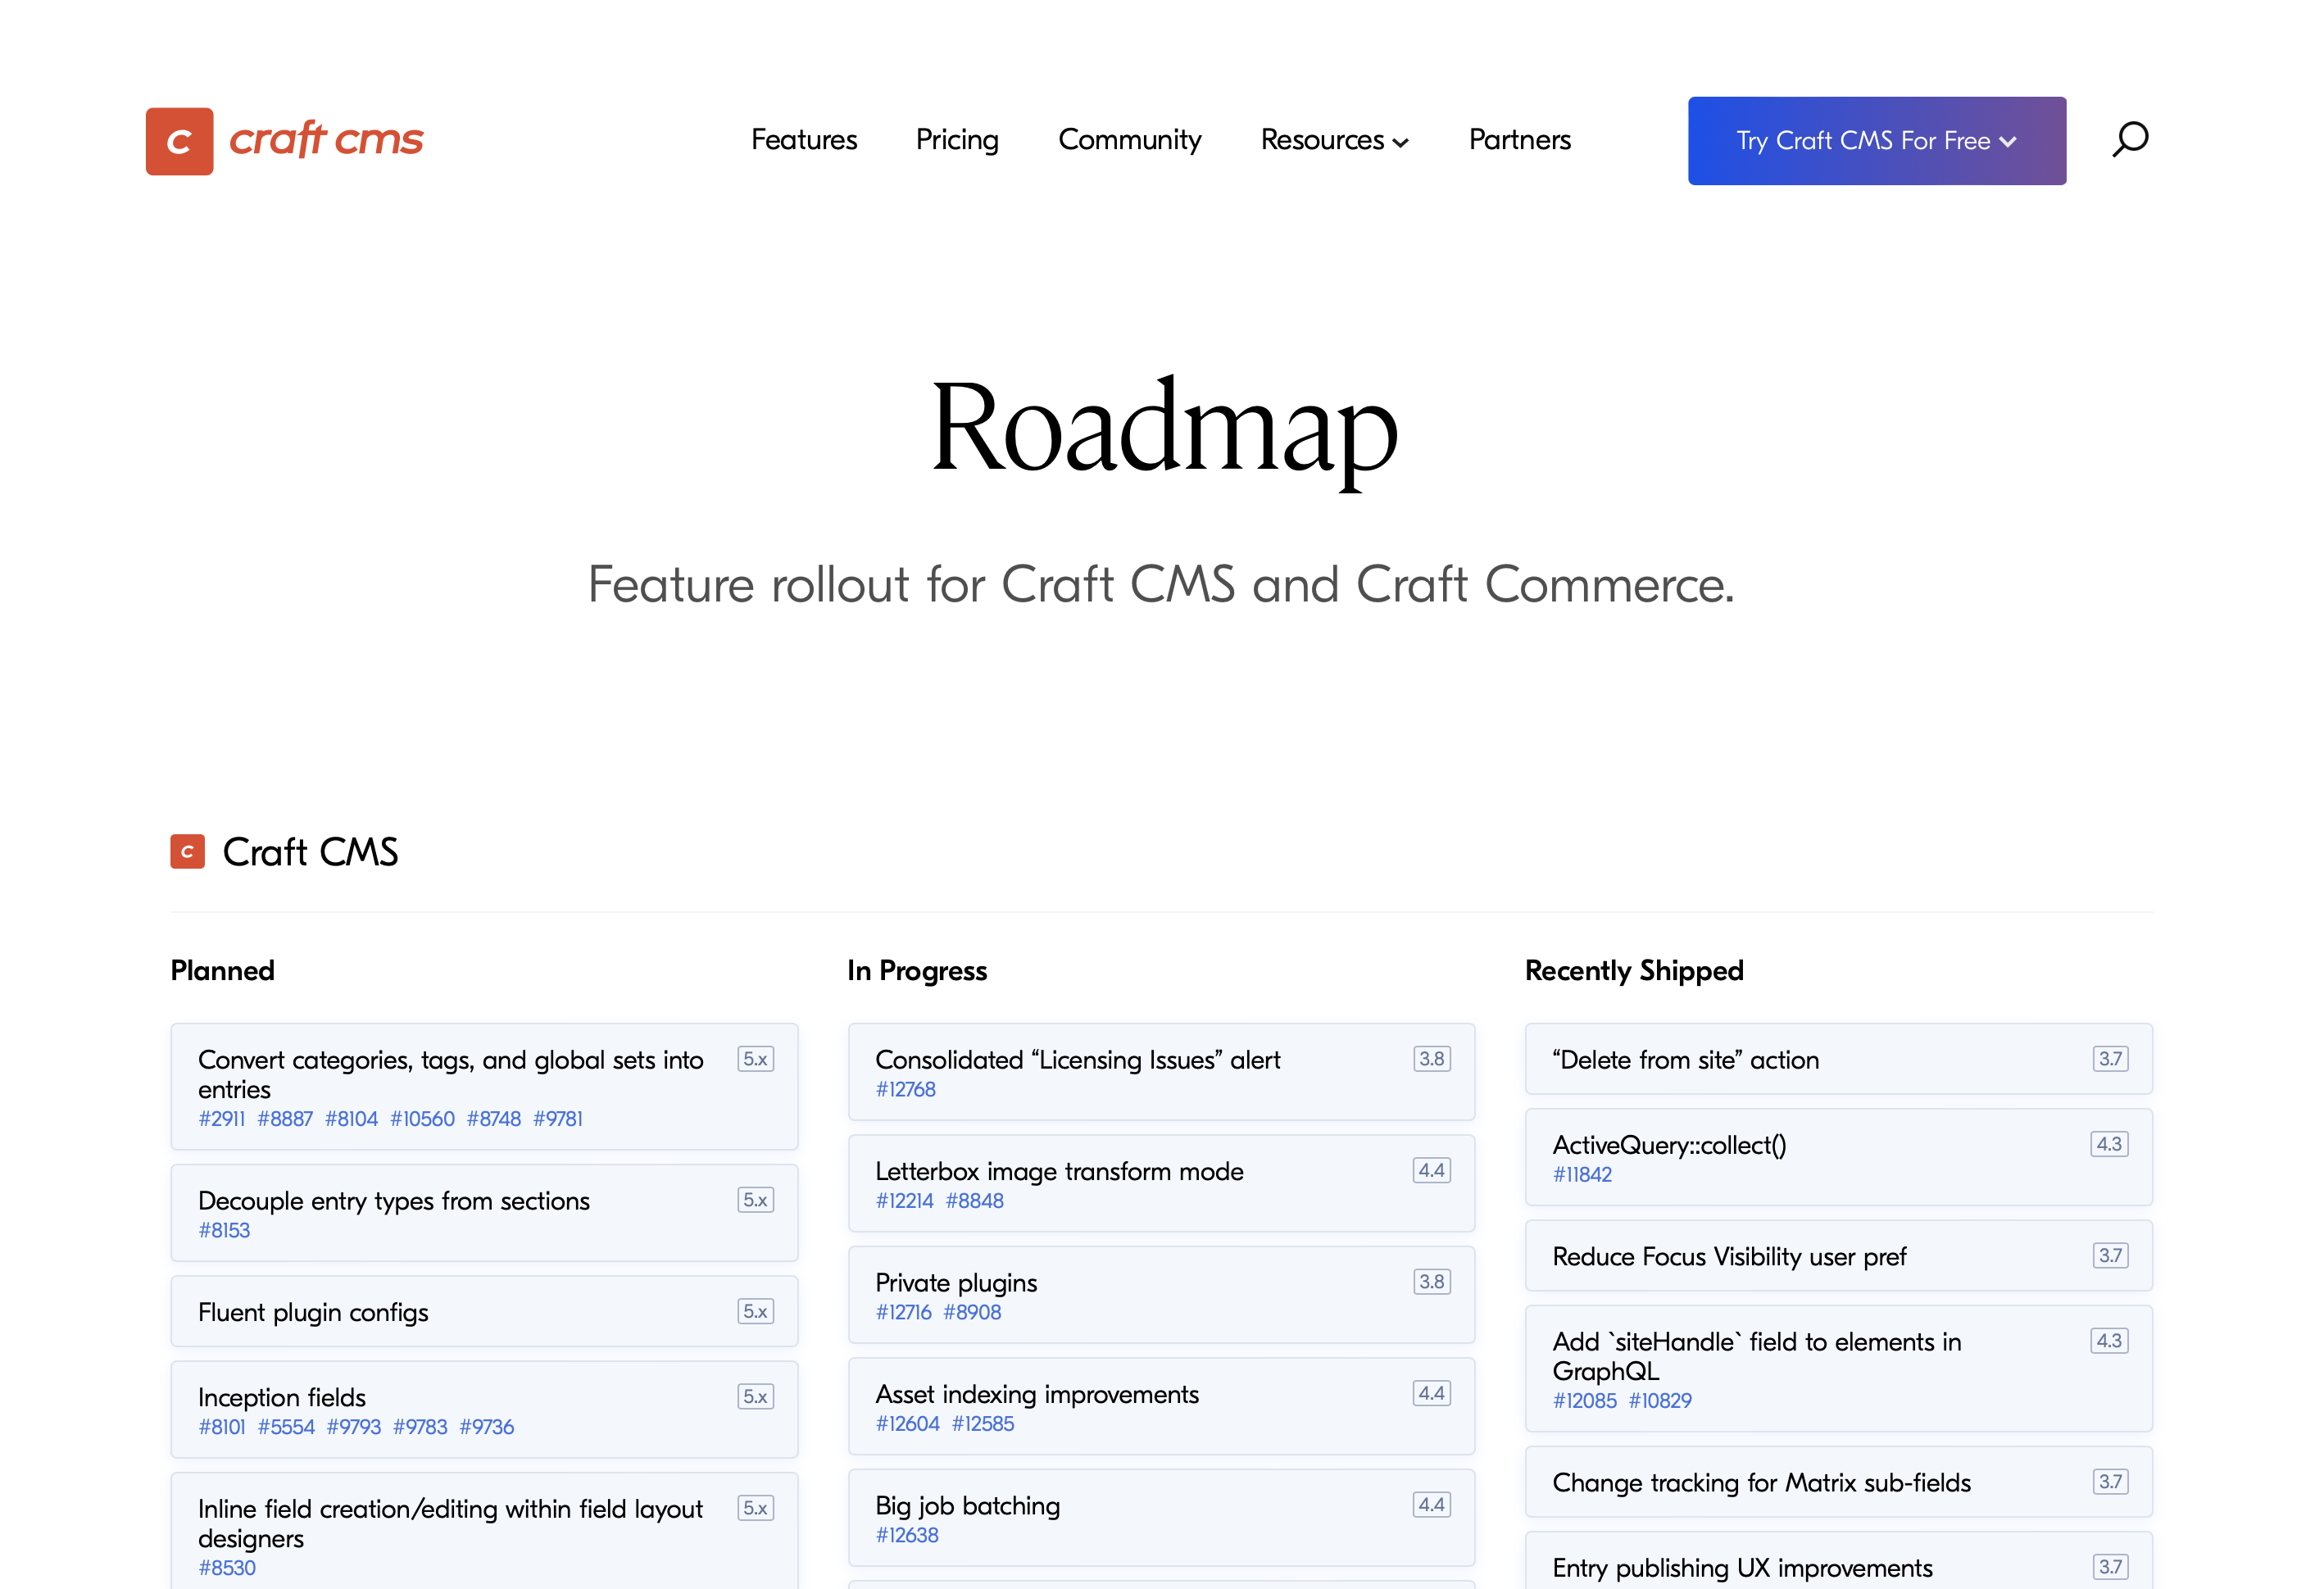 Cropped screenshot of a page that reads: “Roadmap: Feature rollout for Craft CMS and Craft Commerce” with a Craft CMS heading just below and feature cards organized into Planned, In Progress, and Recently Shipped columns